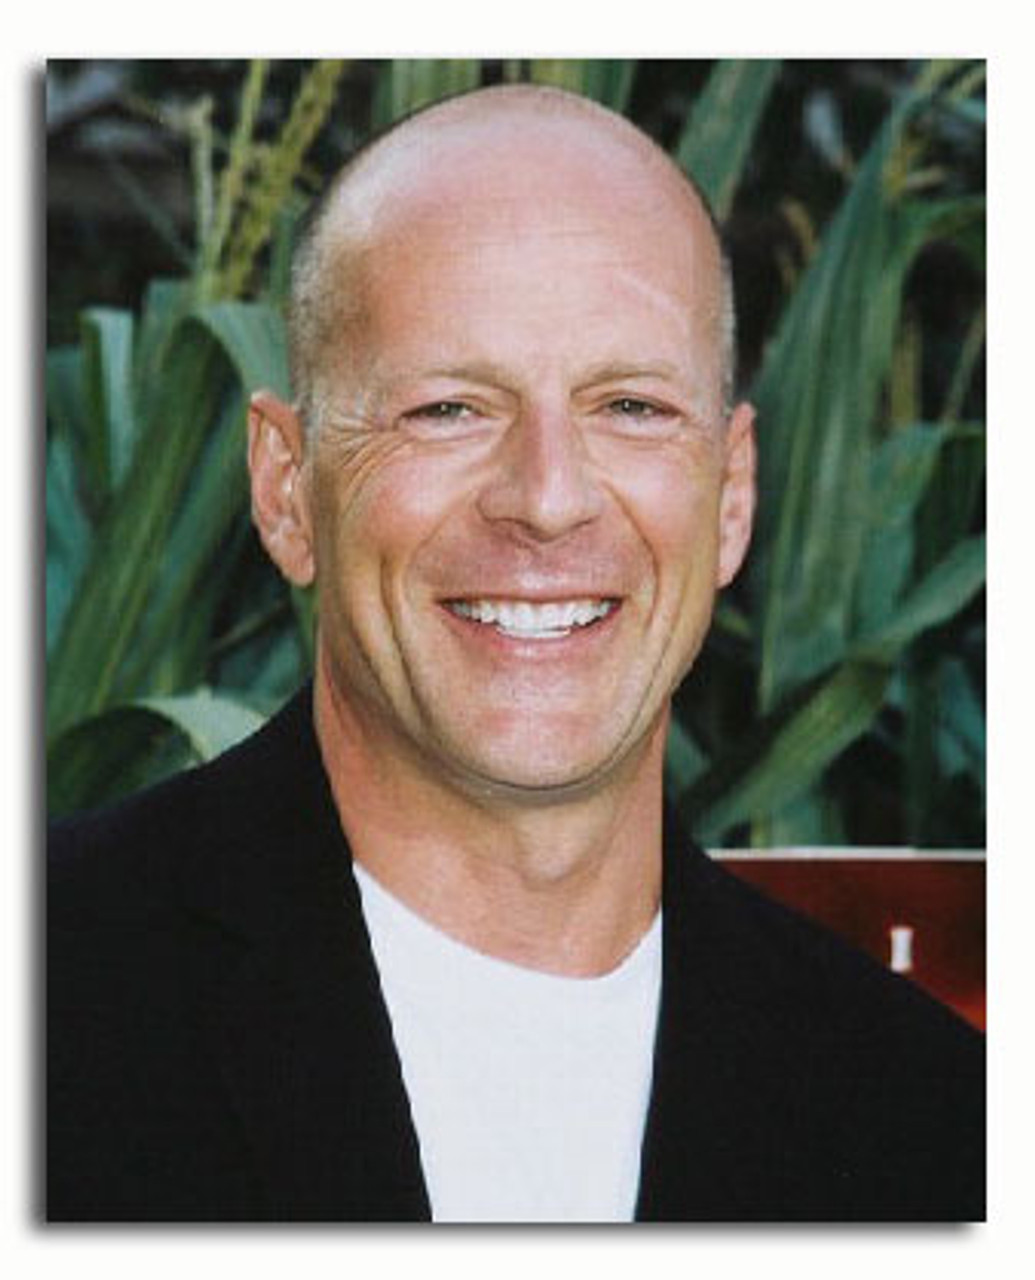 (SS3294265) Music picture of Bruce Willis buy celebrity photos and ...